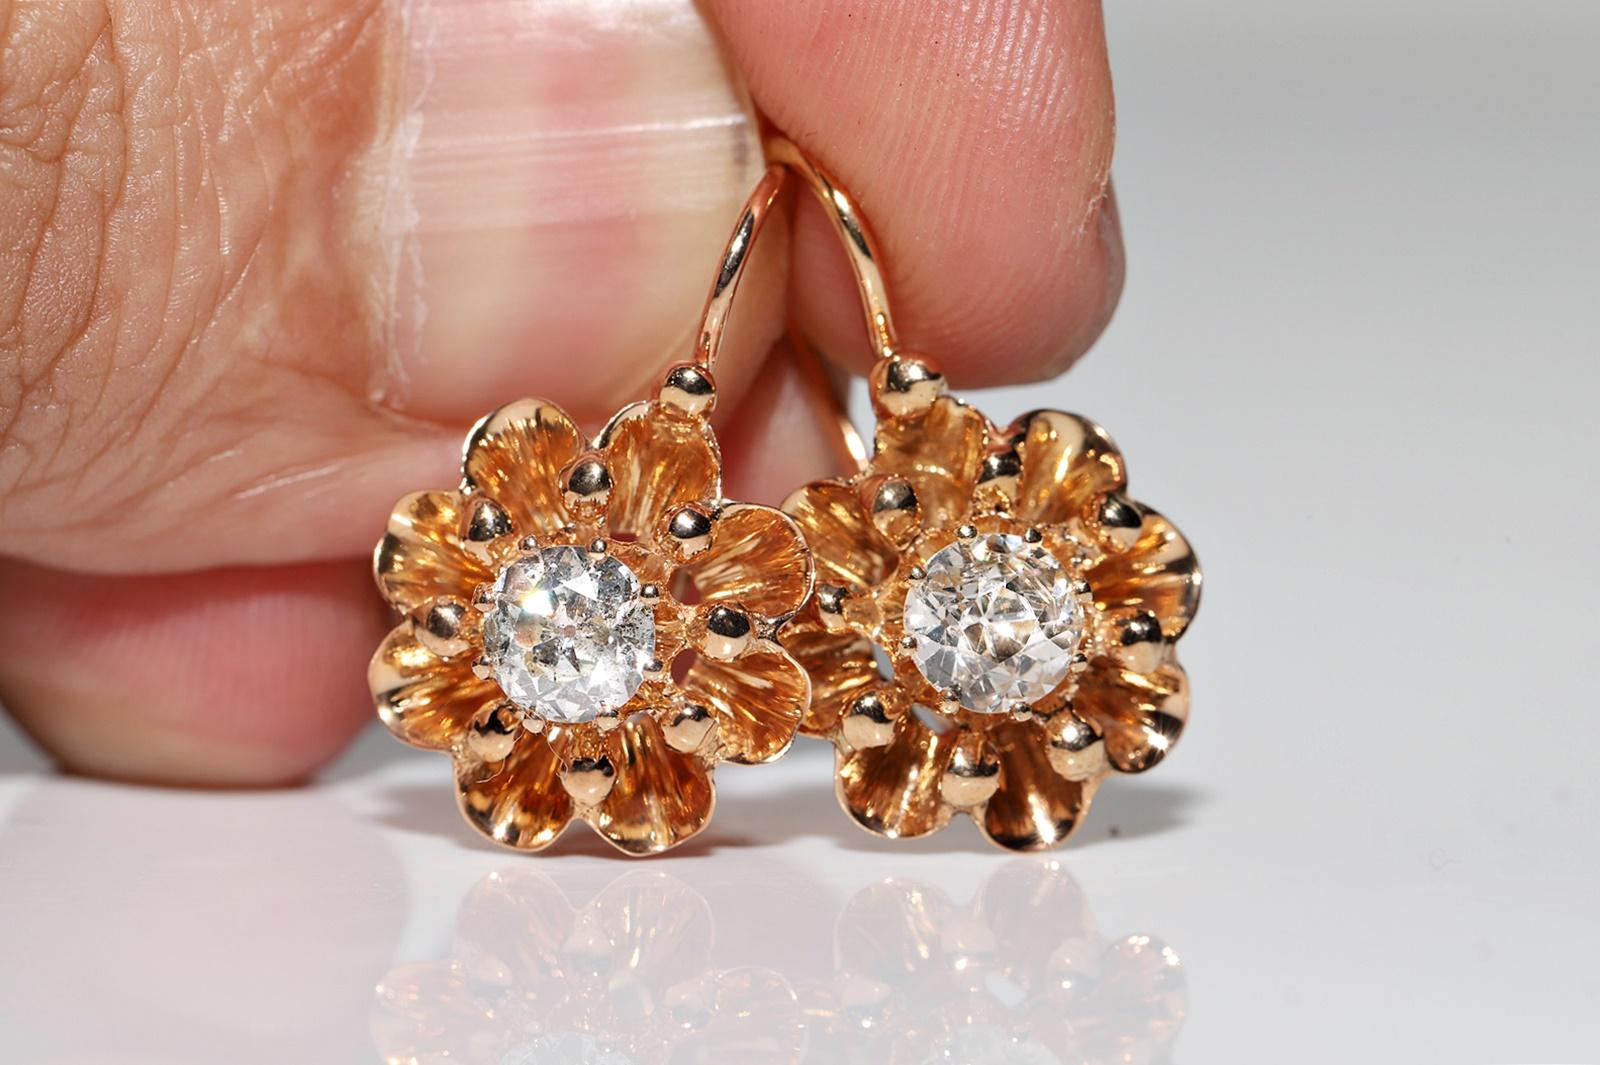 Antique Circa 1900s 14k Gold Natural Old Cut Diamond Decorated Solitaire Earring For Sale 6